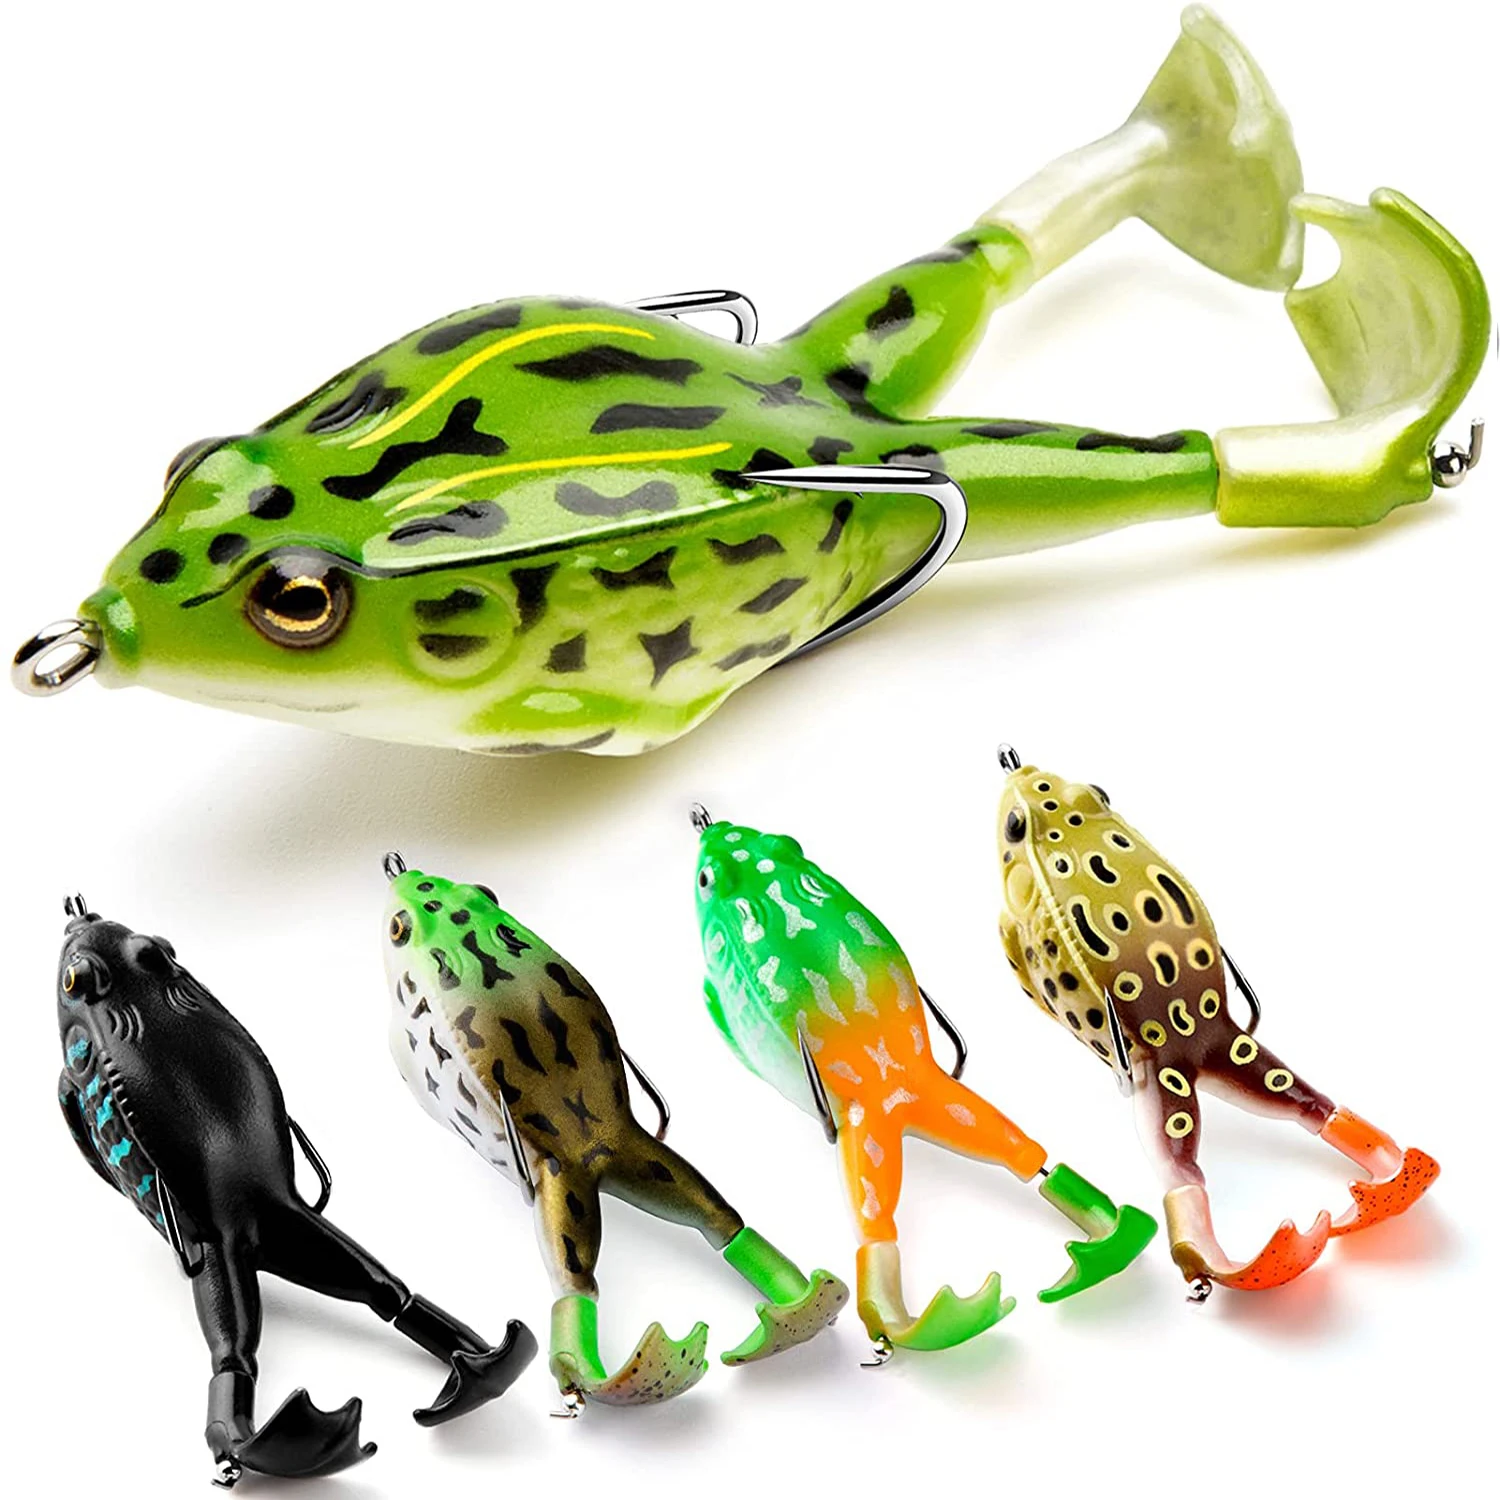 

5Pcs Topwater Frog Lure Fishing Lures Kit Realistic Prop Frog Swimbait Artificial Bait with Double Propeller for Bass Trout